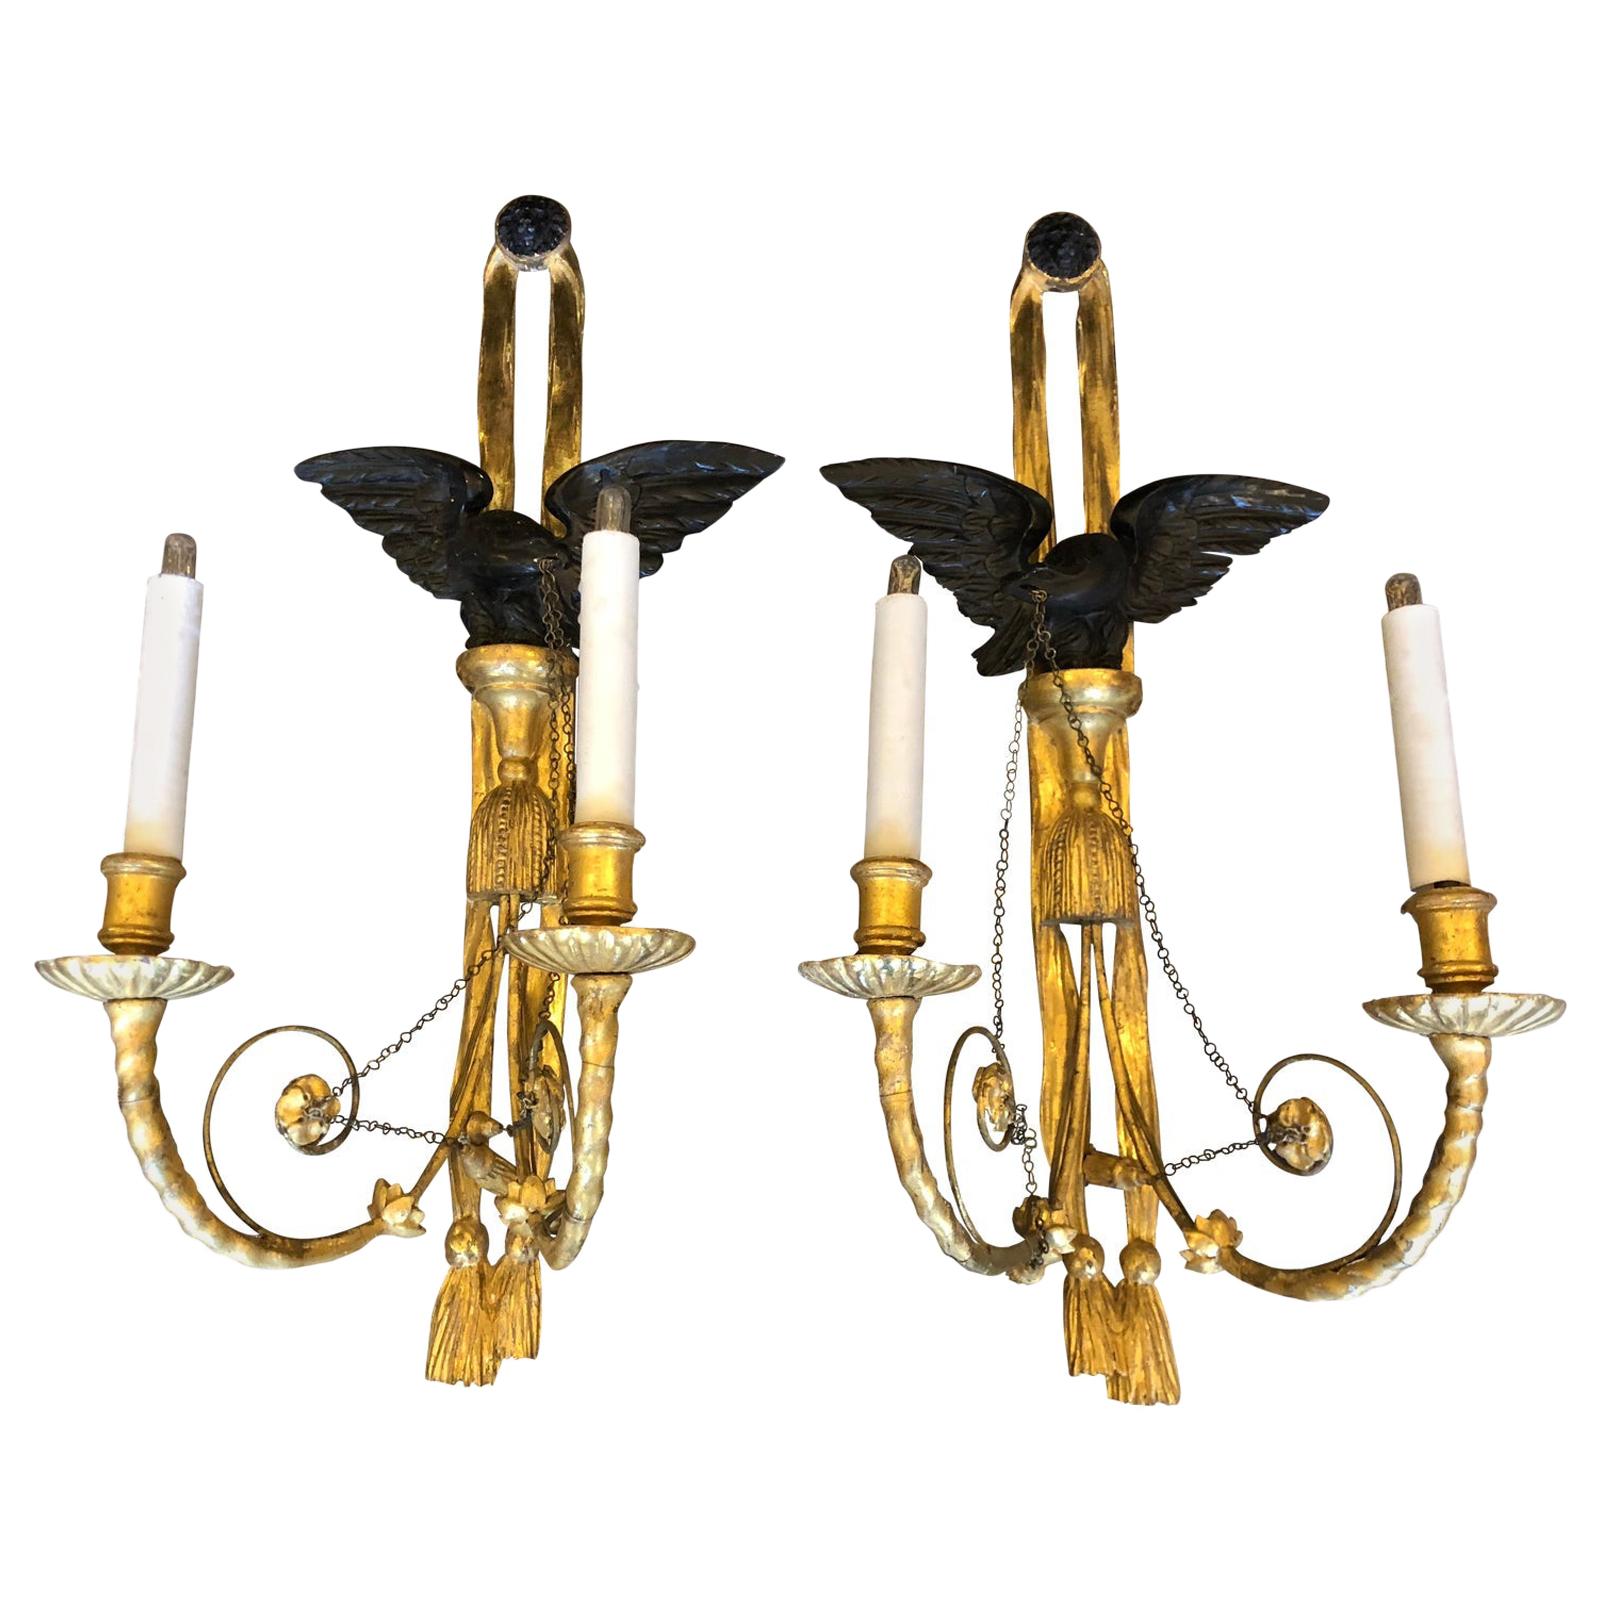 Pair of Antique Early 19th Century Federal Giltwood Wall Sconces with Eagles